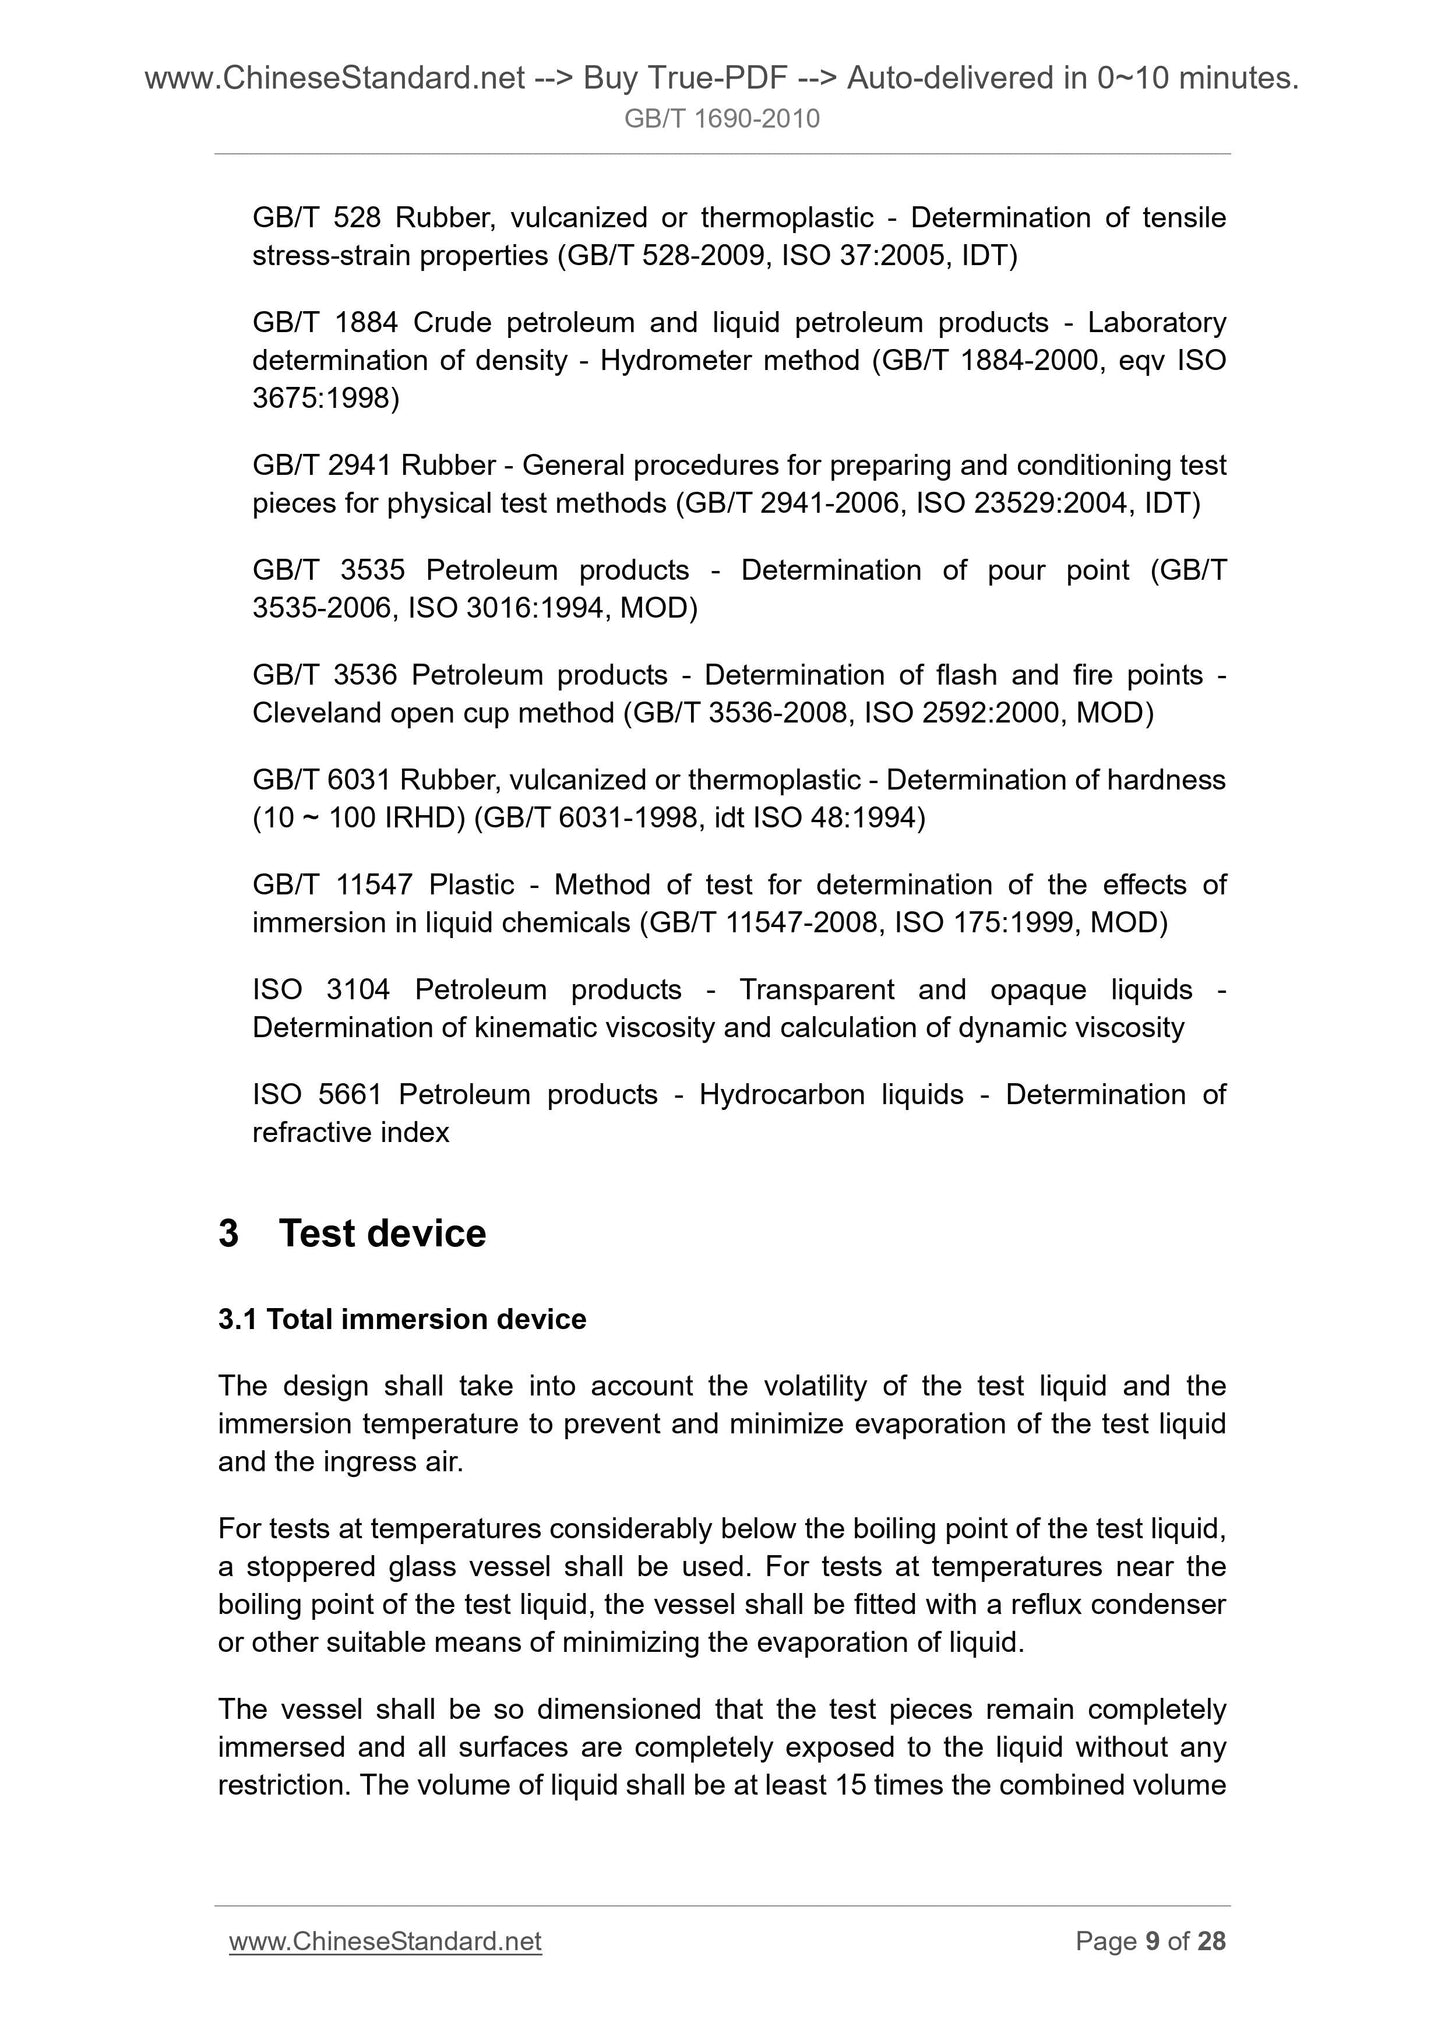 GB/T 1690-2010 Page 6